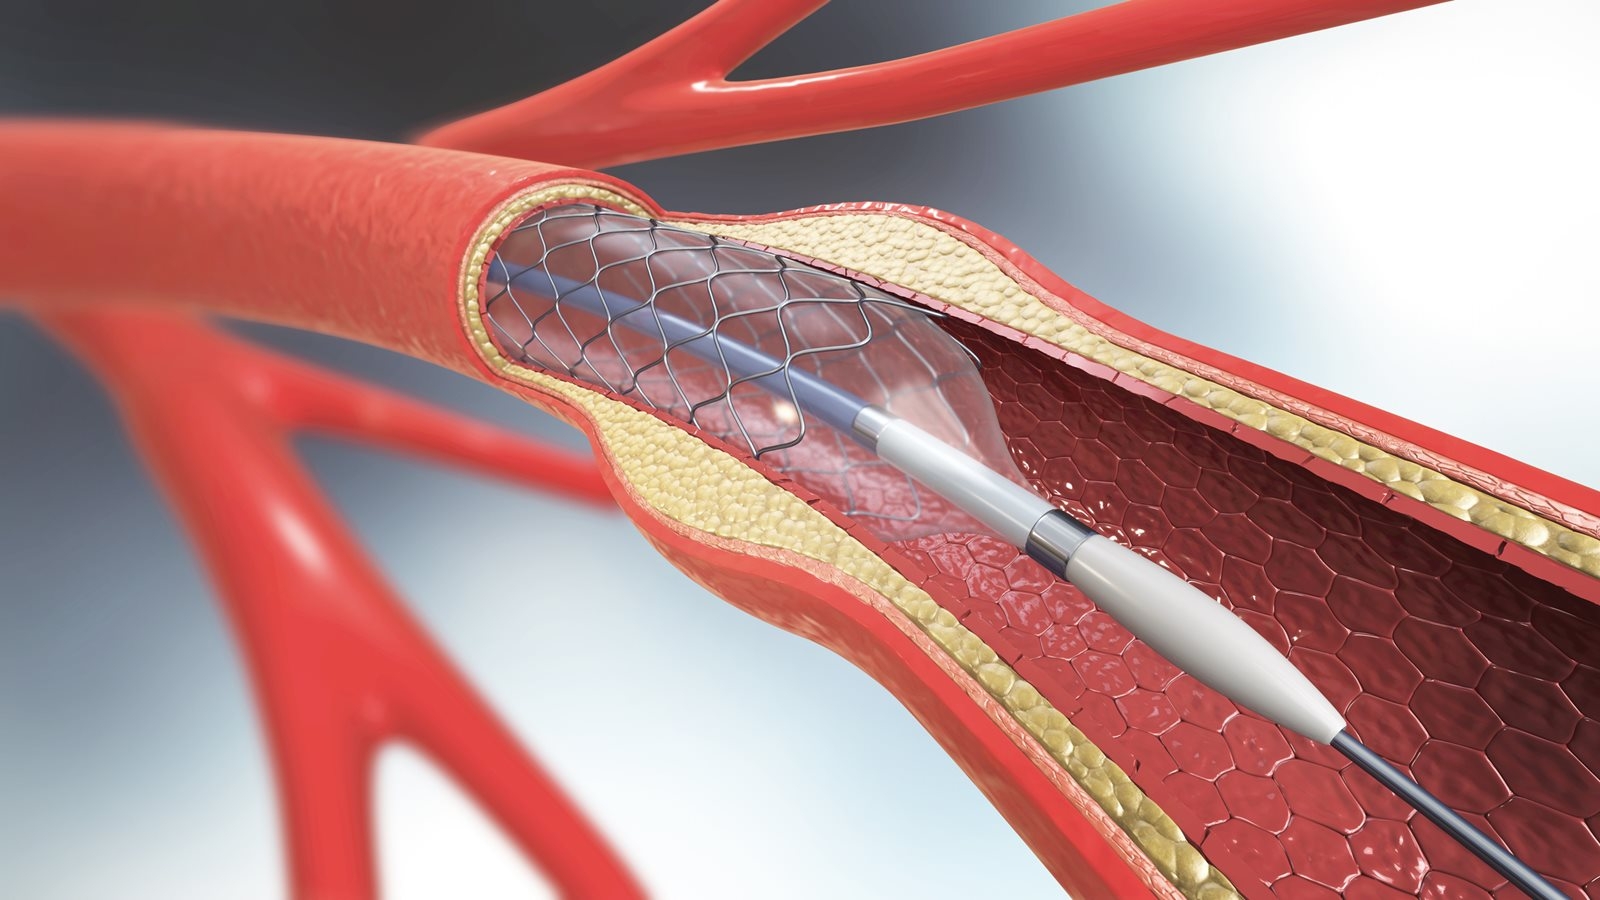 graphic depiction of internal heart showing heart stent